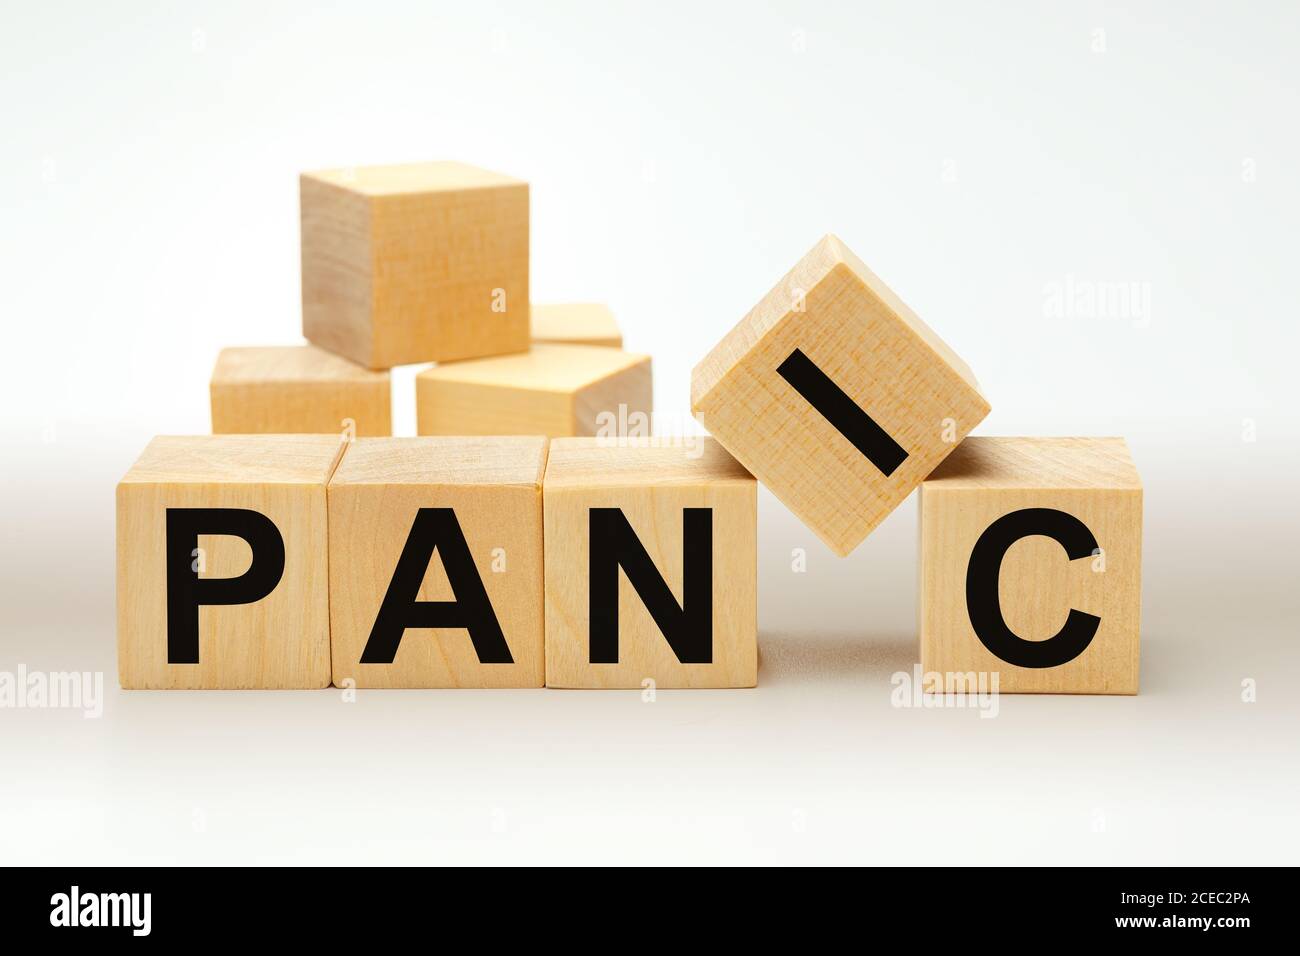 Wooden blocks with the word PANIC. Business concept Stock Photo